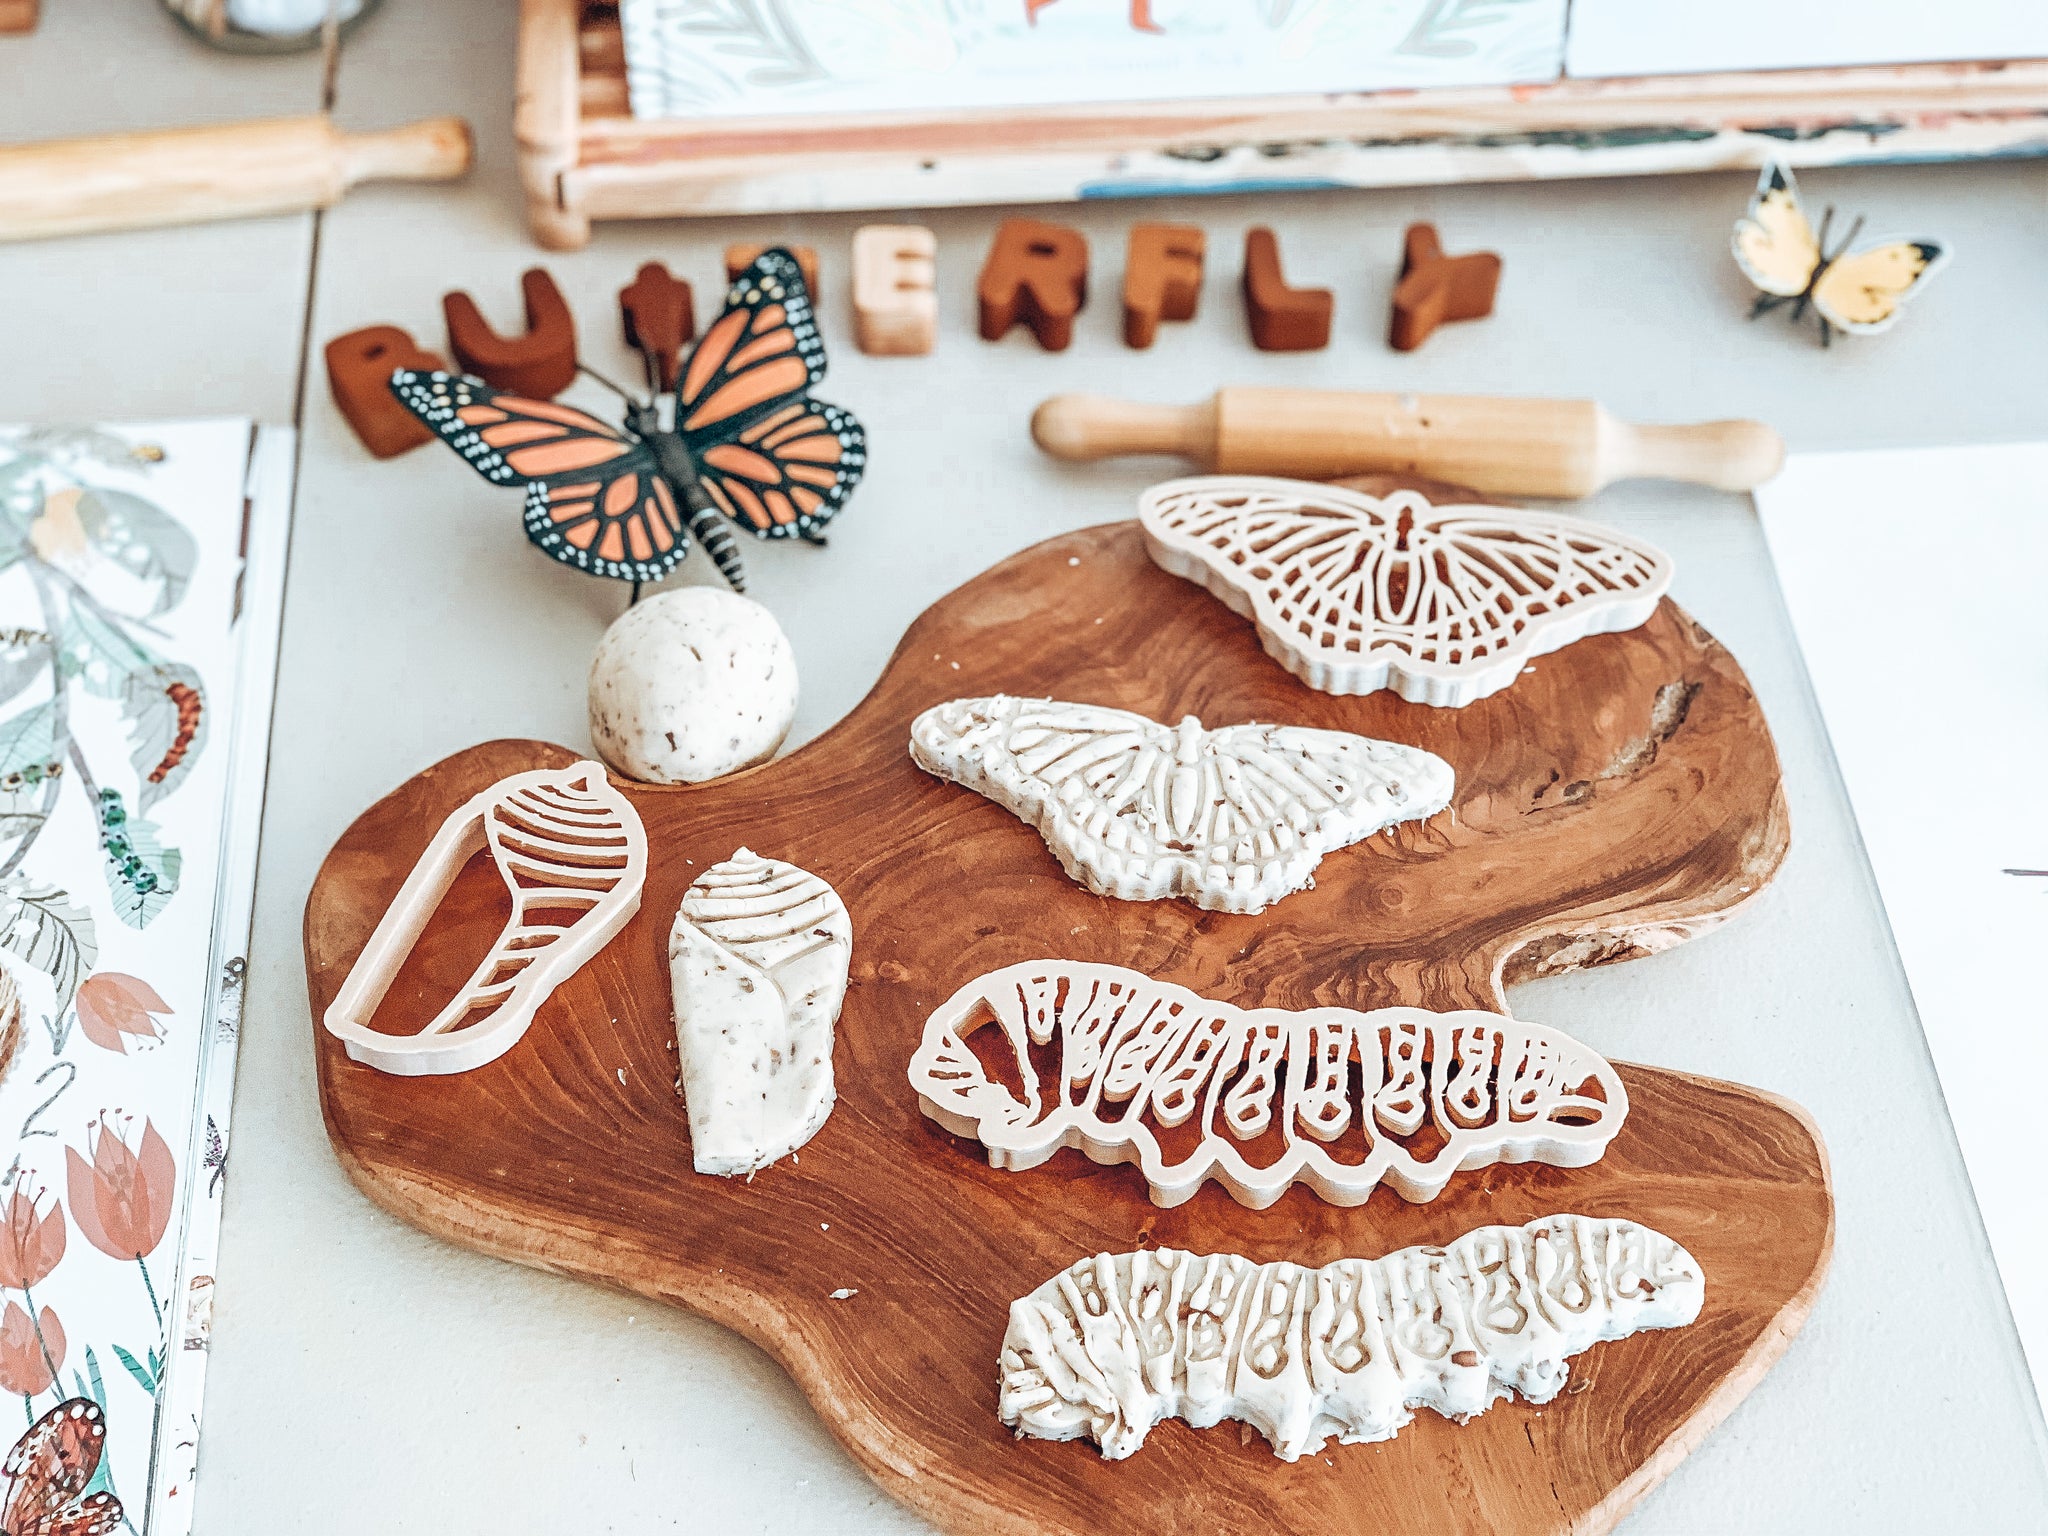 Butterfly Life Cycle Eco Cutter Set